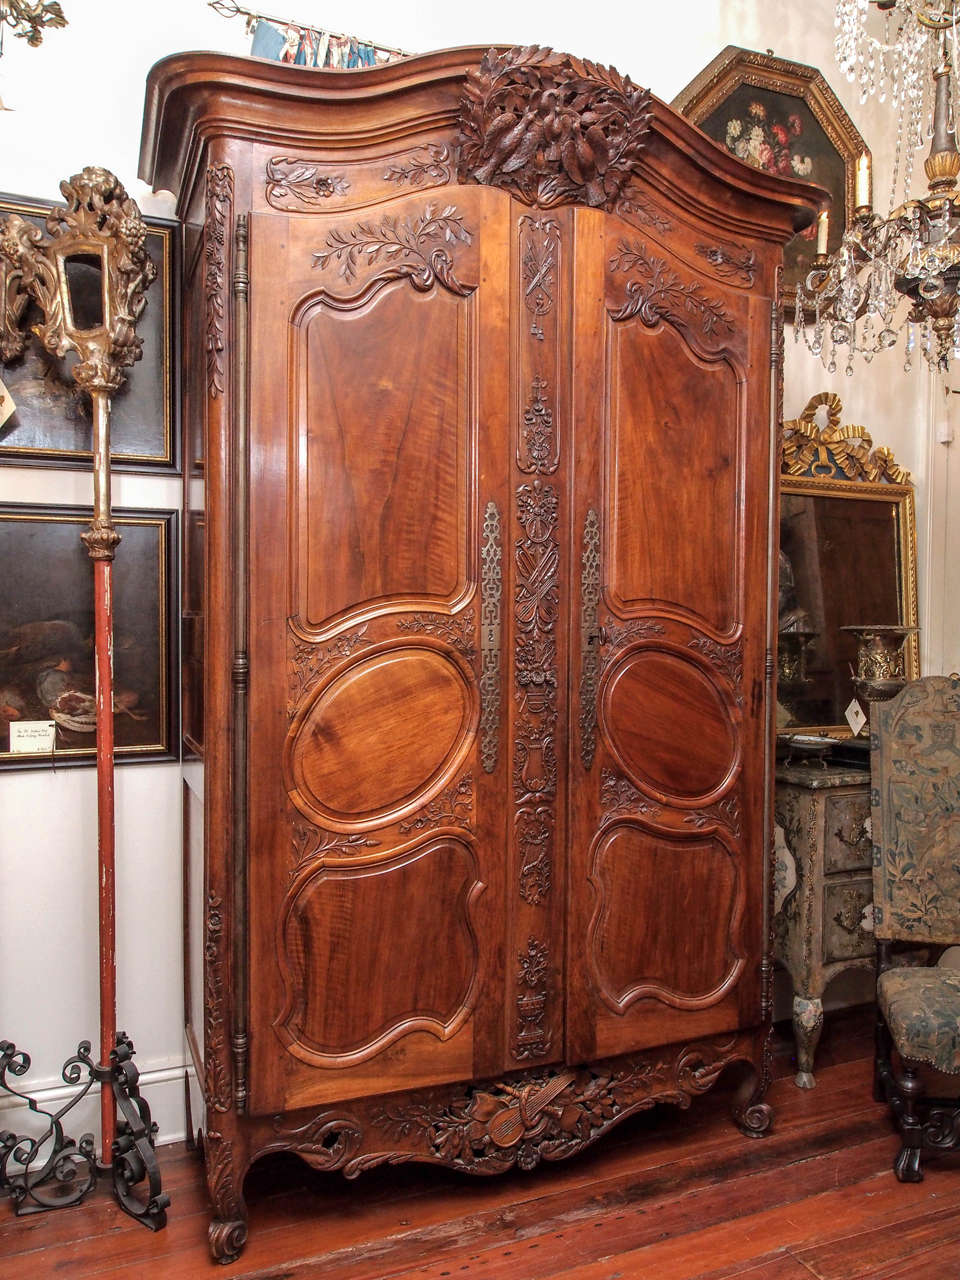 French Louis XV walnut Armoire du Marriage form a chateau in the Luberon area, 18th century. Having carved decoration in music and foliate decoration. The traditional crest with pierced apron.